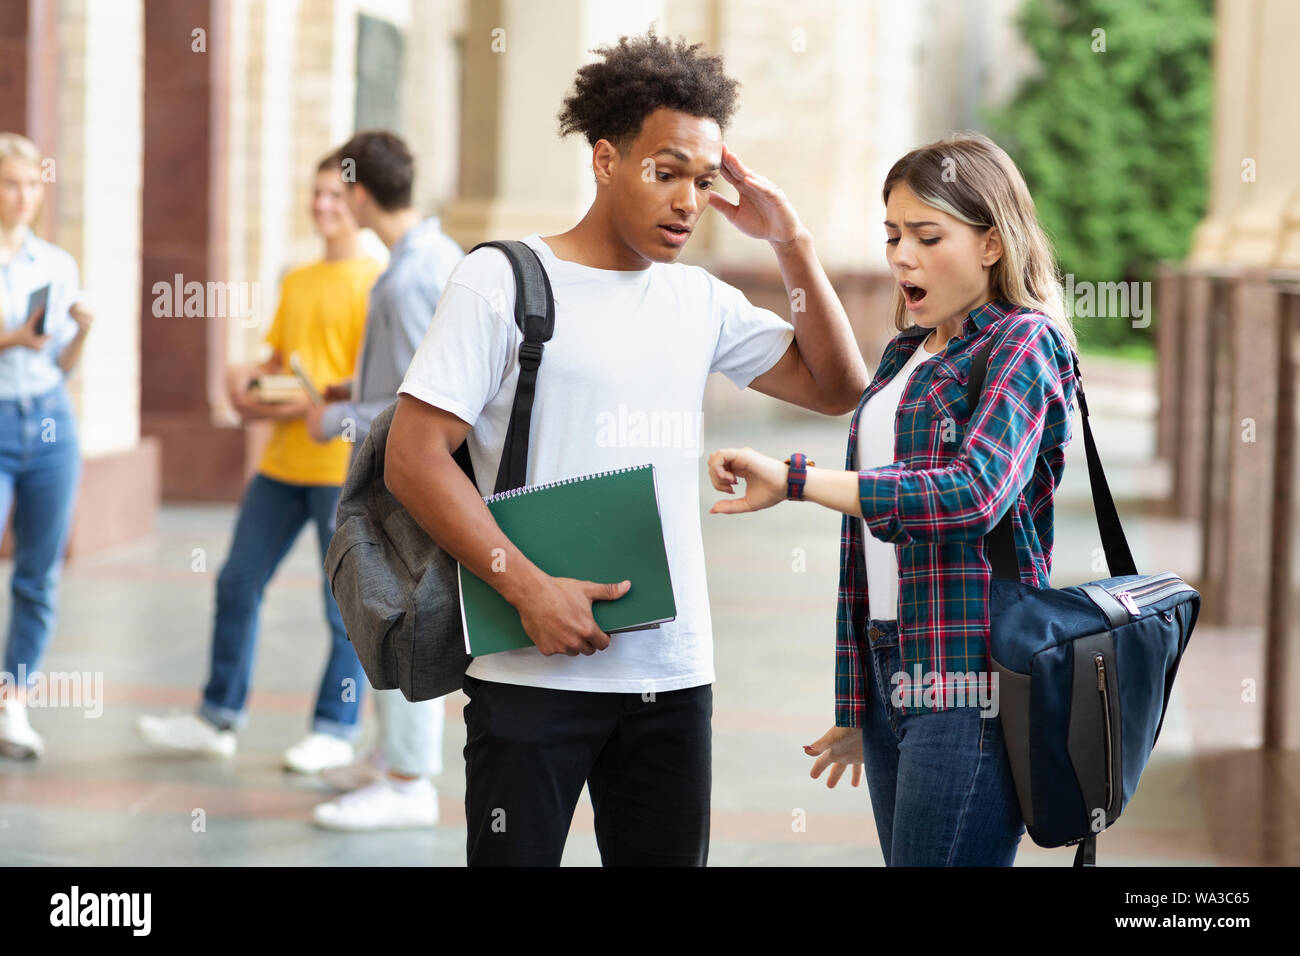 Hurry up! Multiracial students in university campus Stock Photo